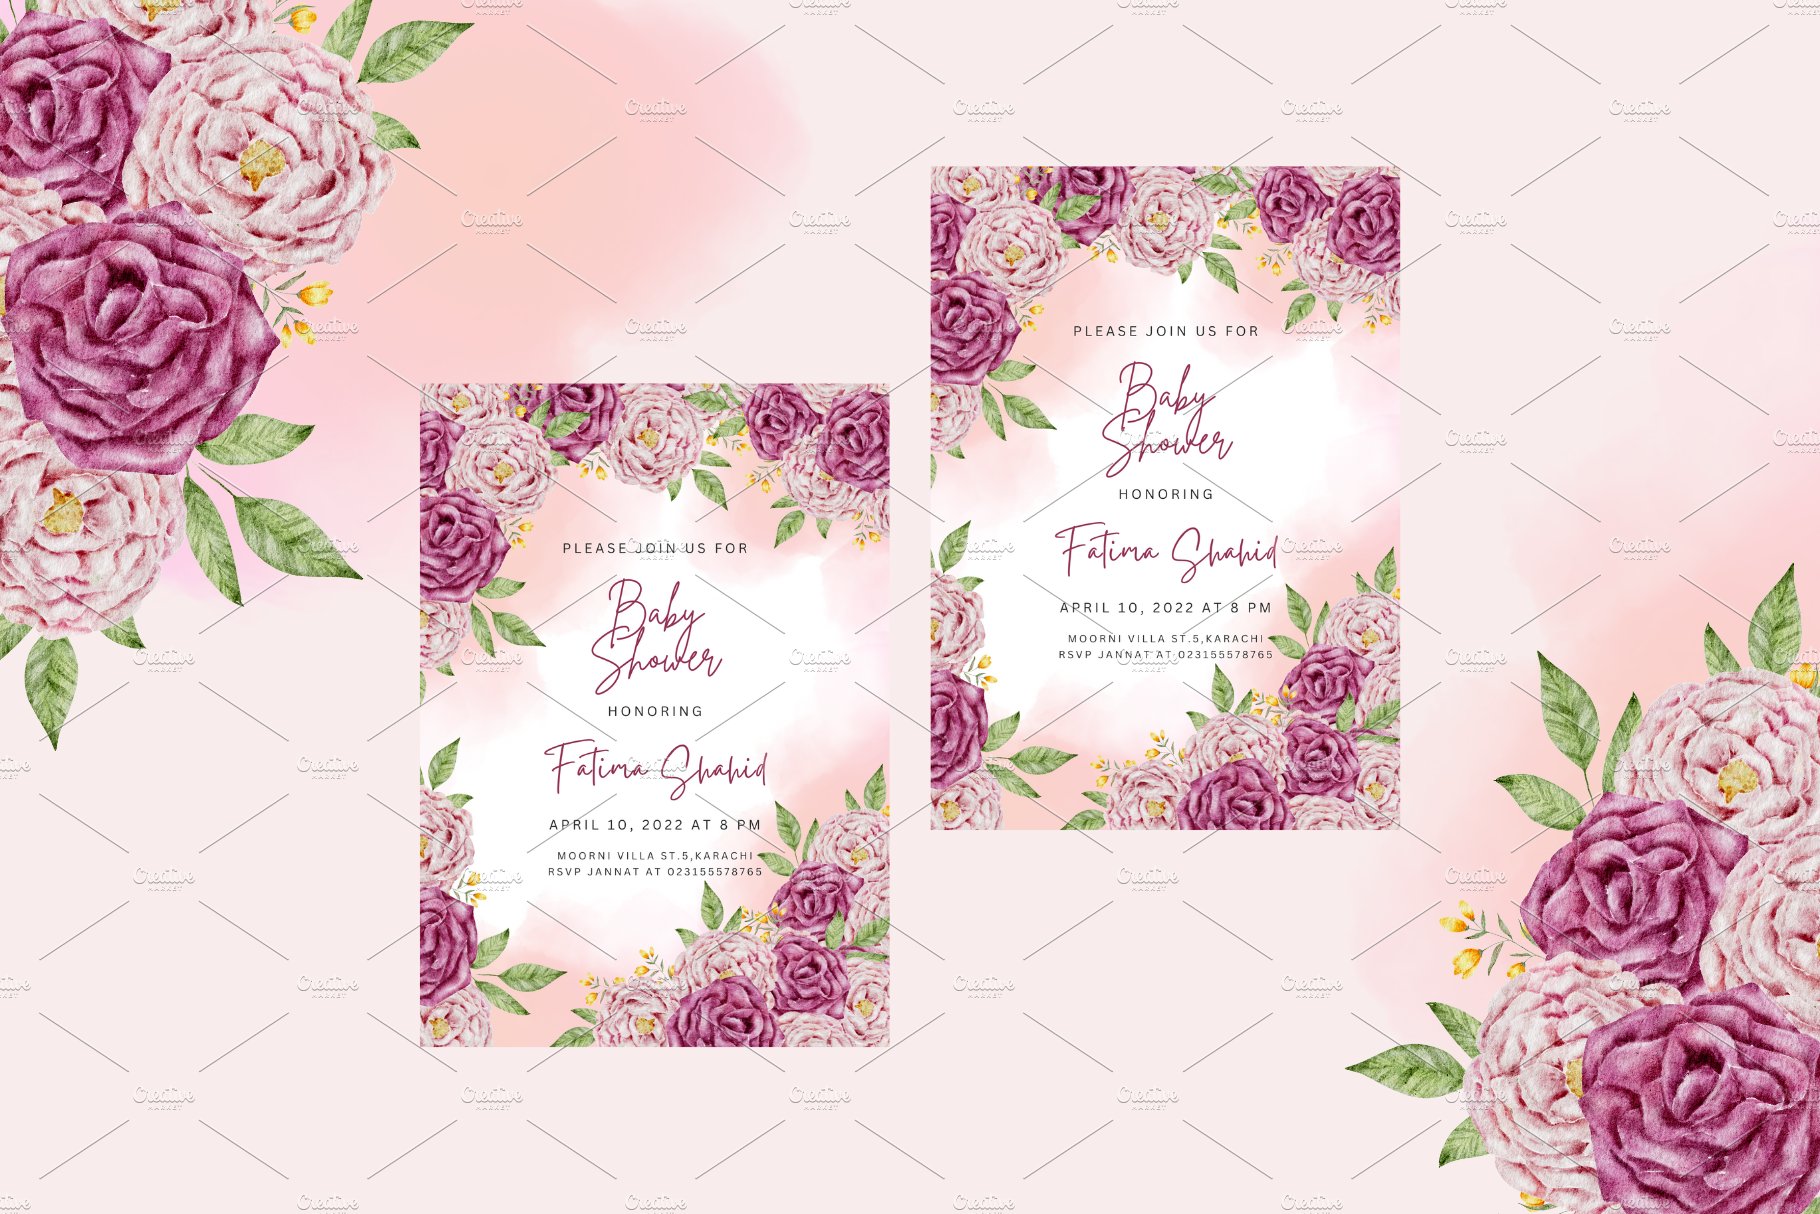 Pink Floral Baby Shower Invitation cover image.